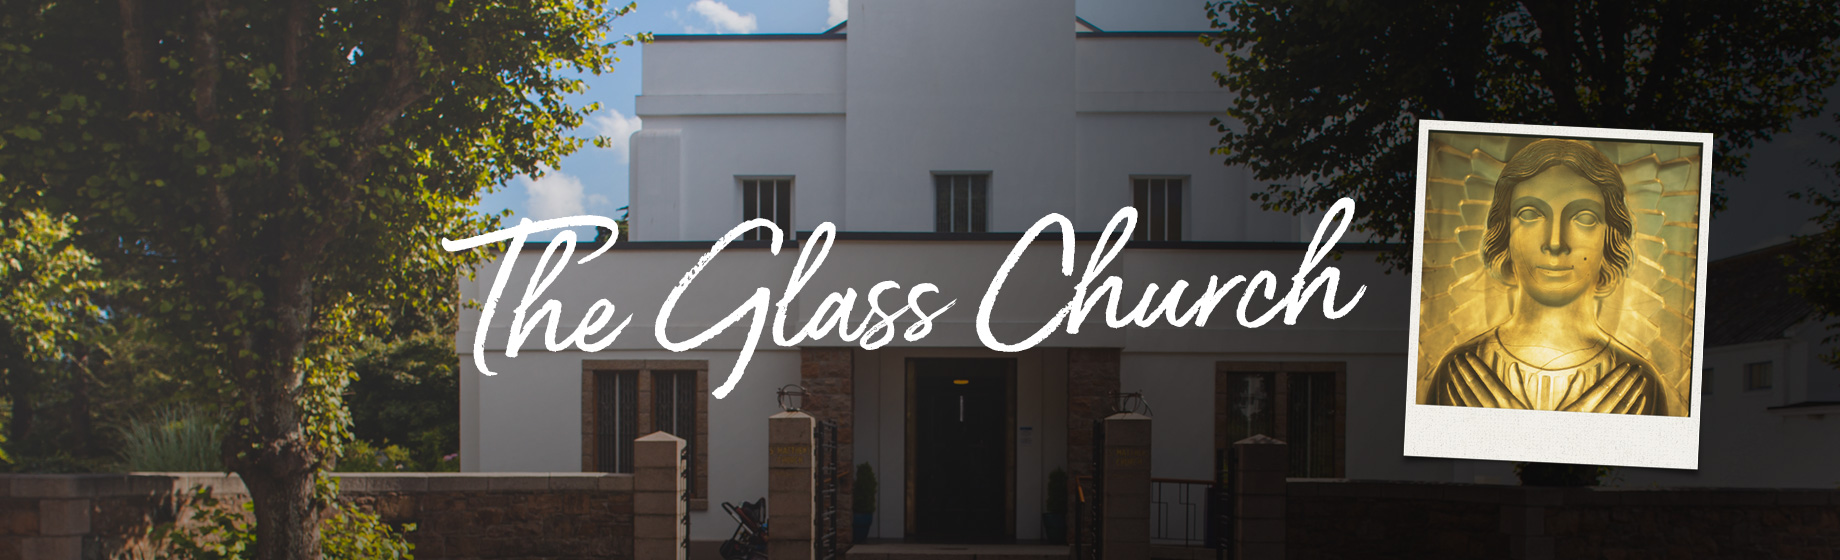 Country-Drive—Glass-Church